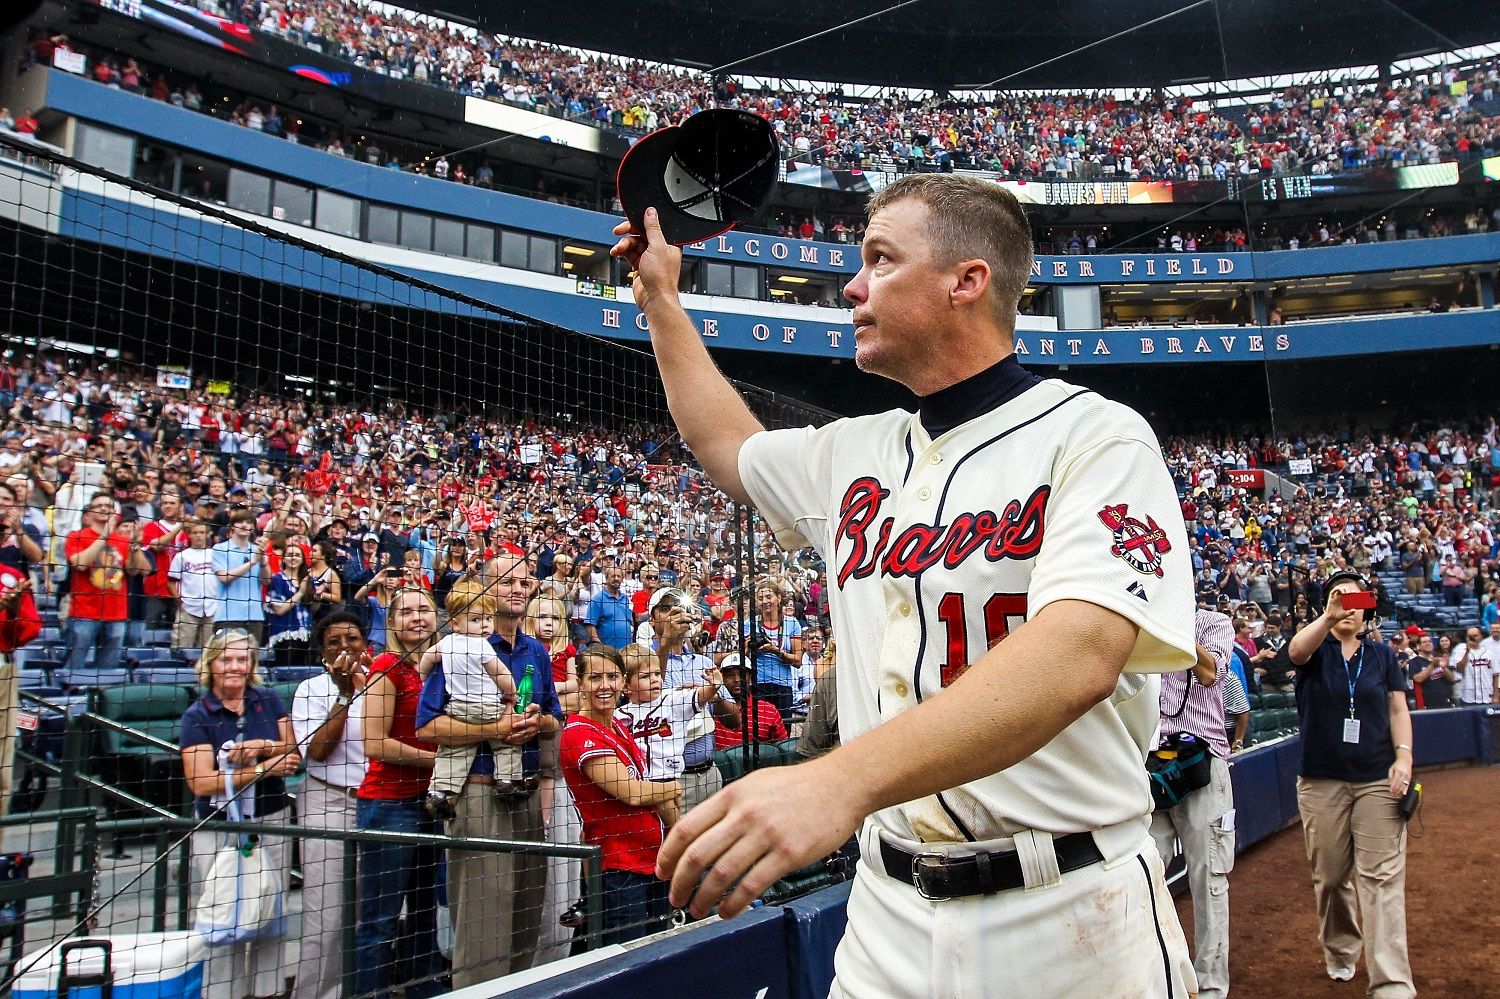 ATLANTA, GA - SEPTEMBER 30: Chipper Jones #10 of the Atlanta Braves waves his hat to fans after the game against the New York Mets at Turner Field on September 30, 2012 in Atlanta, Georgia. The Braves won 6-2. (Photo by Daniel Shirey/Getty Images)